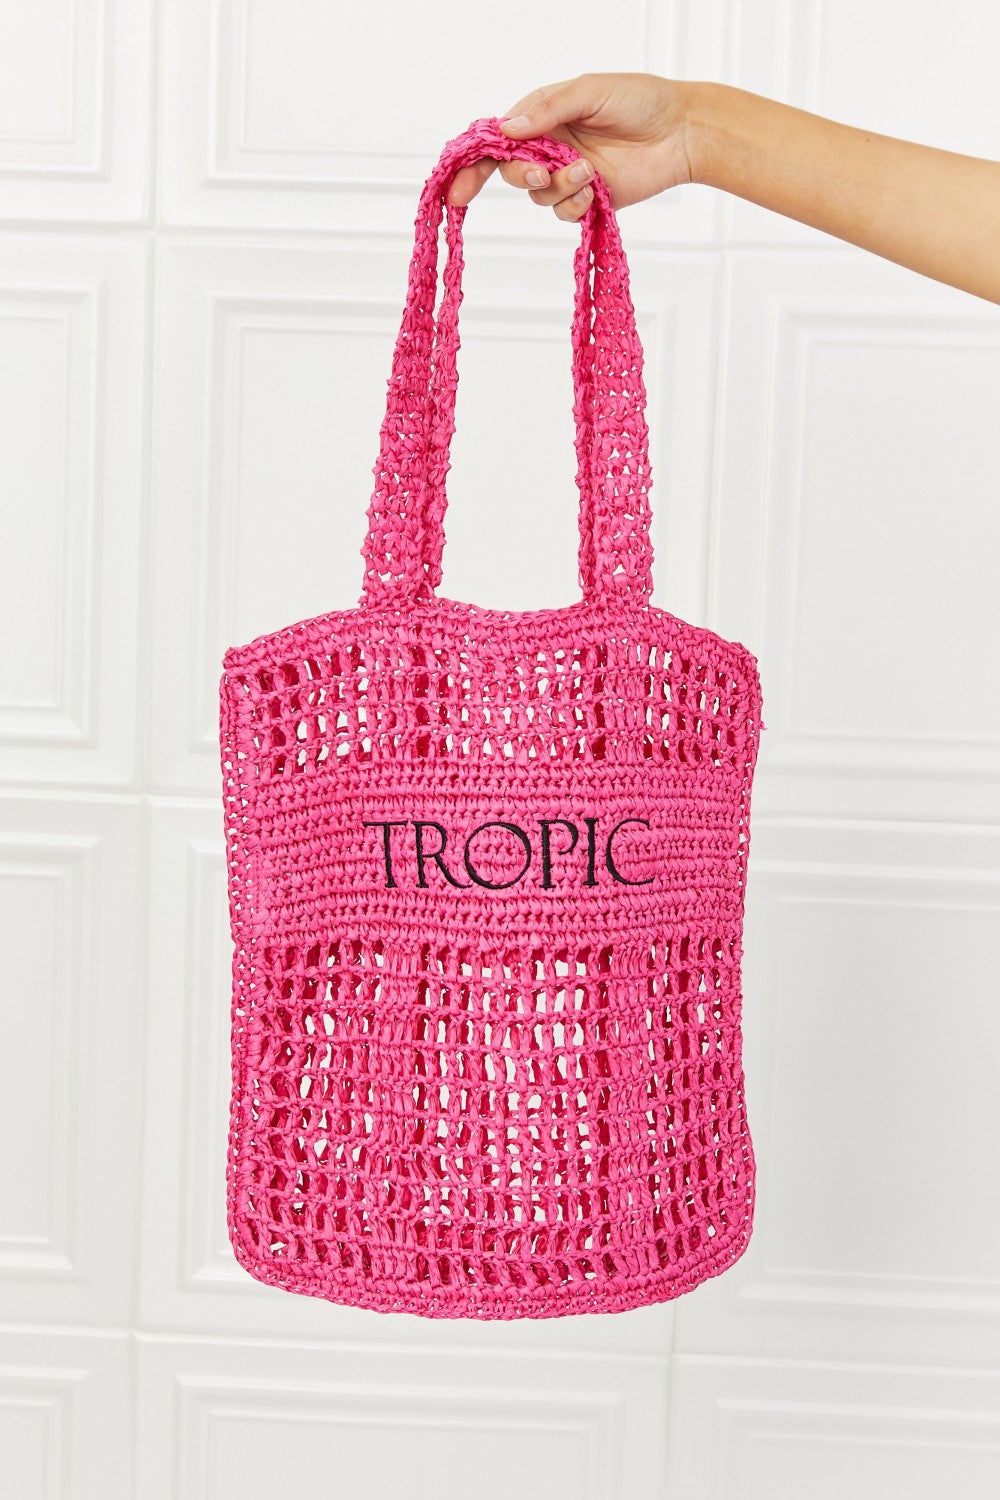 Fame Tropic Babe Staw Tote Bag - By Baano